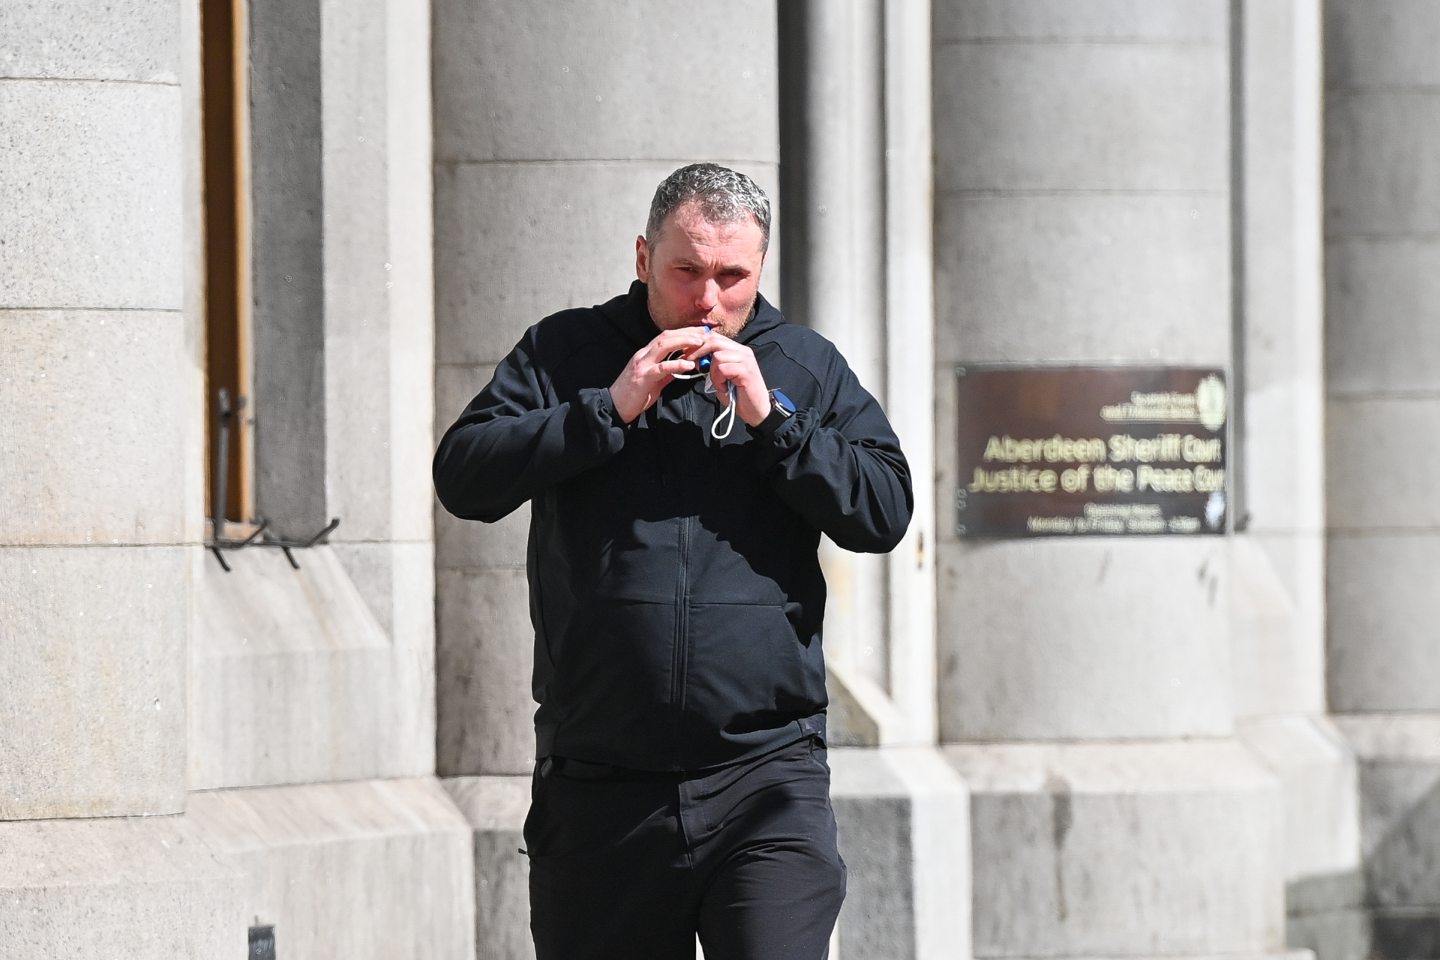 Kevin Mallett leaving Aberdeen Sheriff Court after a previous appearance last month.